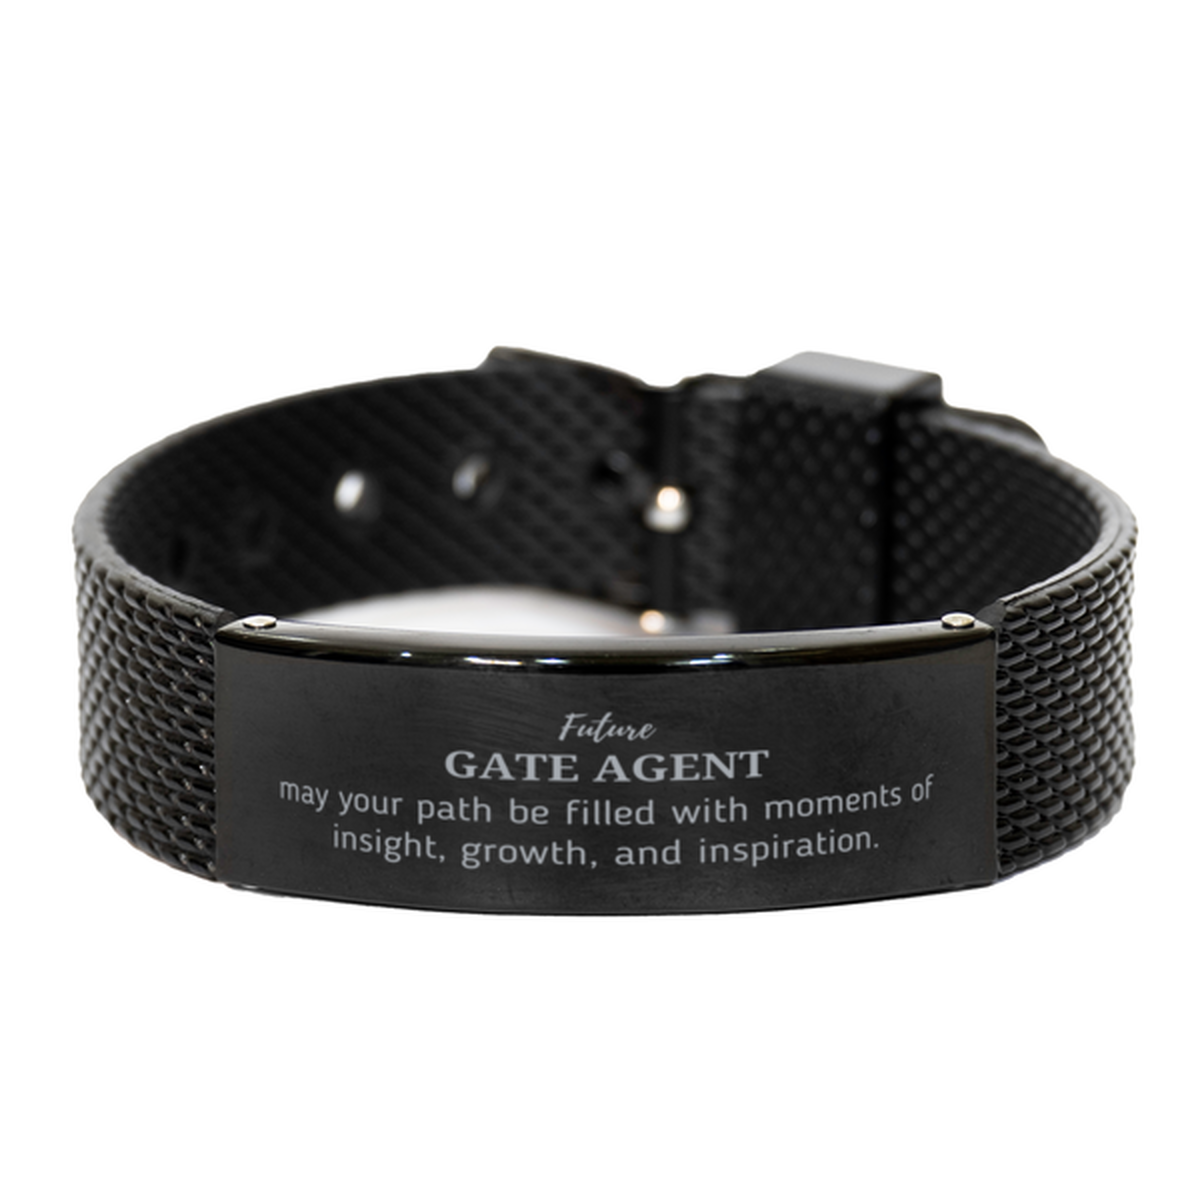 Future Gate Agent Gifts, May your path be filled with moments of insight, Graduation Gifts for New Gate Agent, Christmas Unique Black Shark Mesh Bracelet For Men, Women, Friends